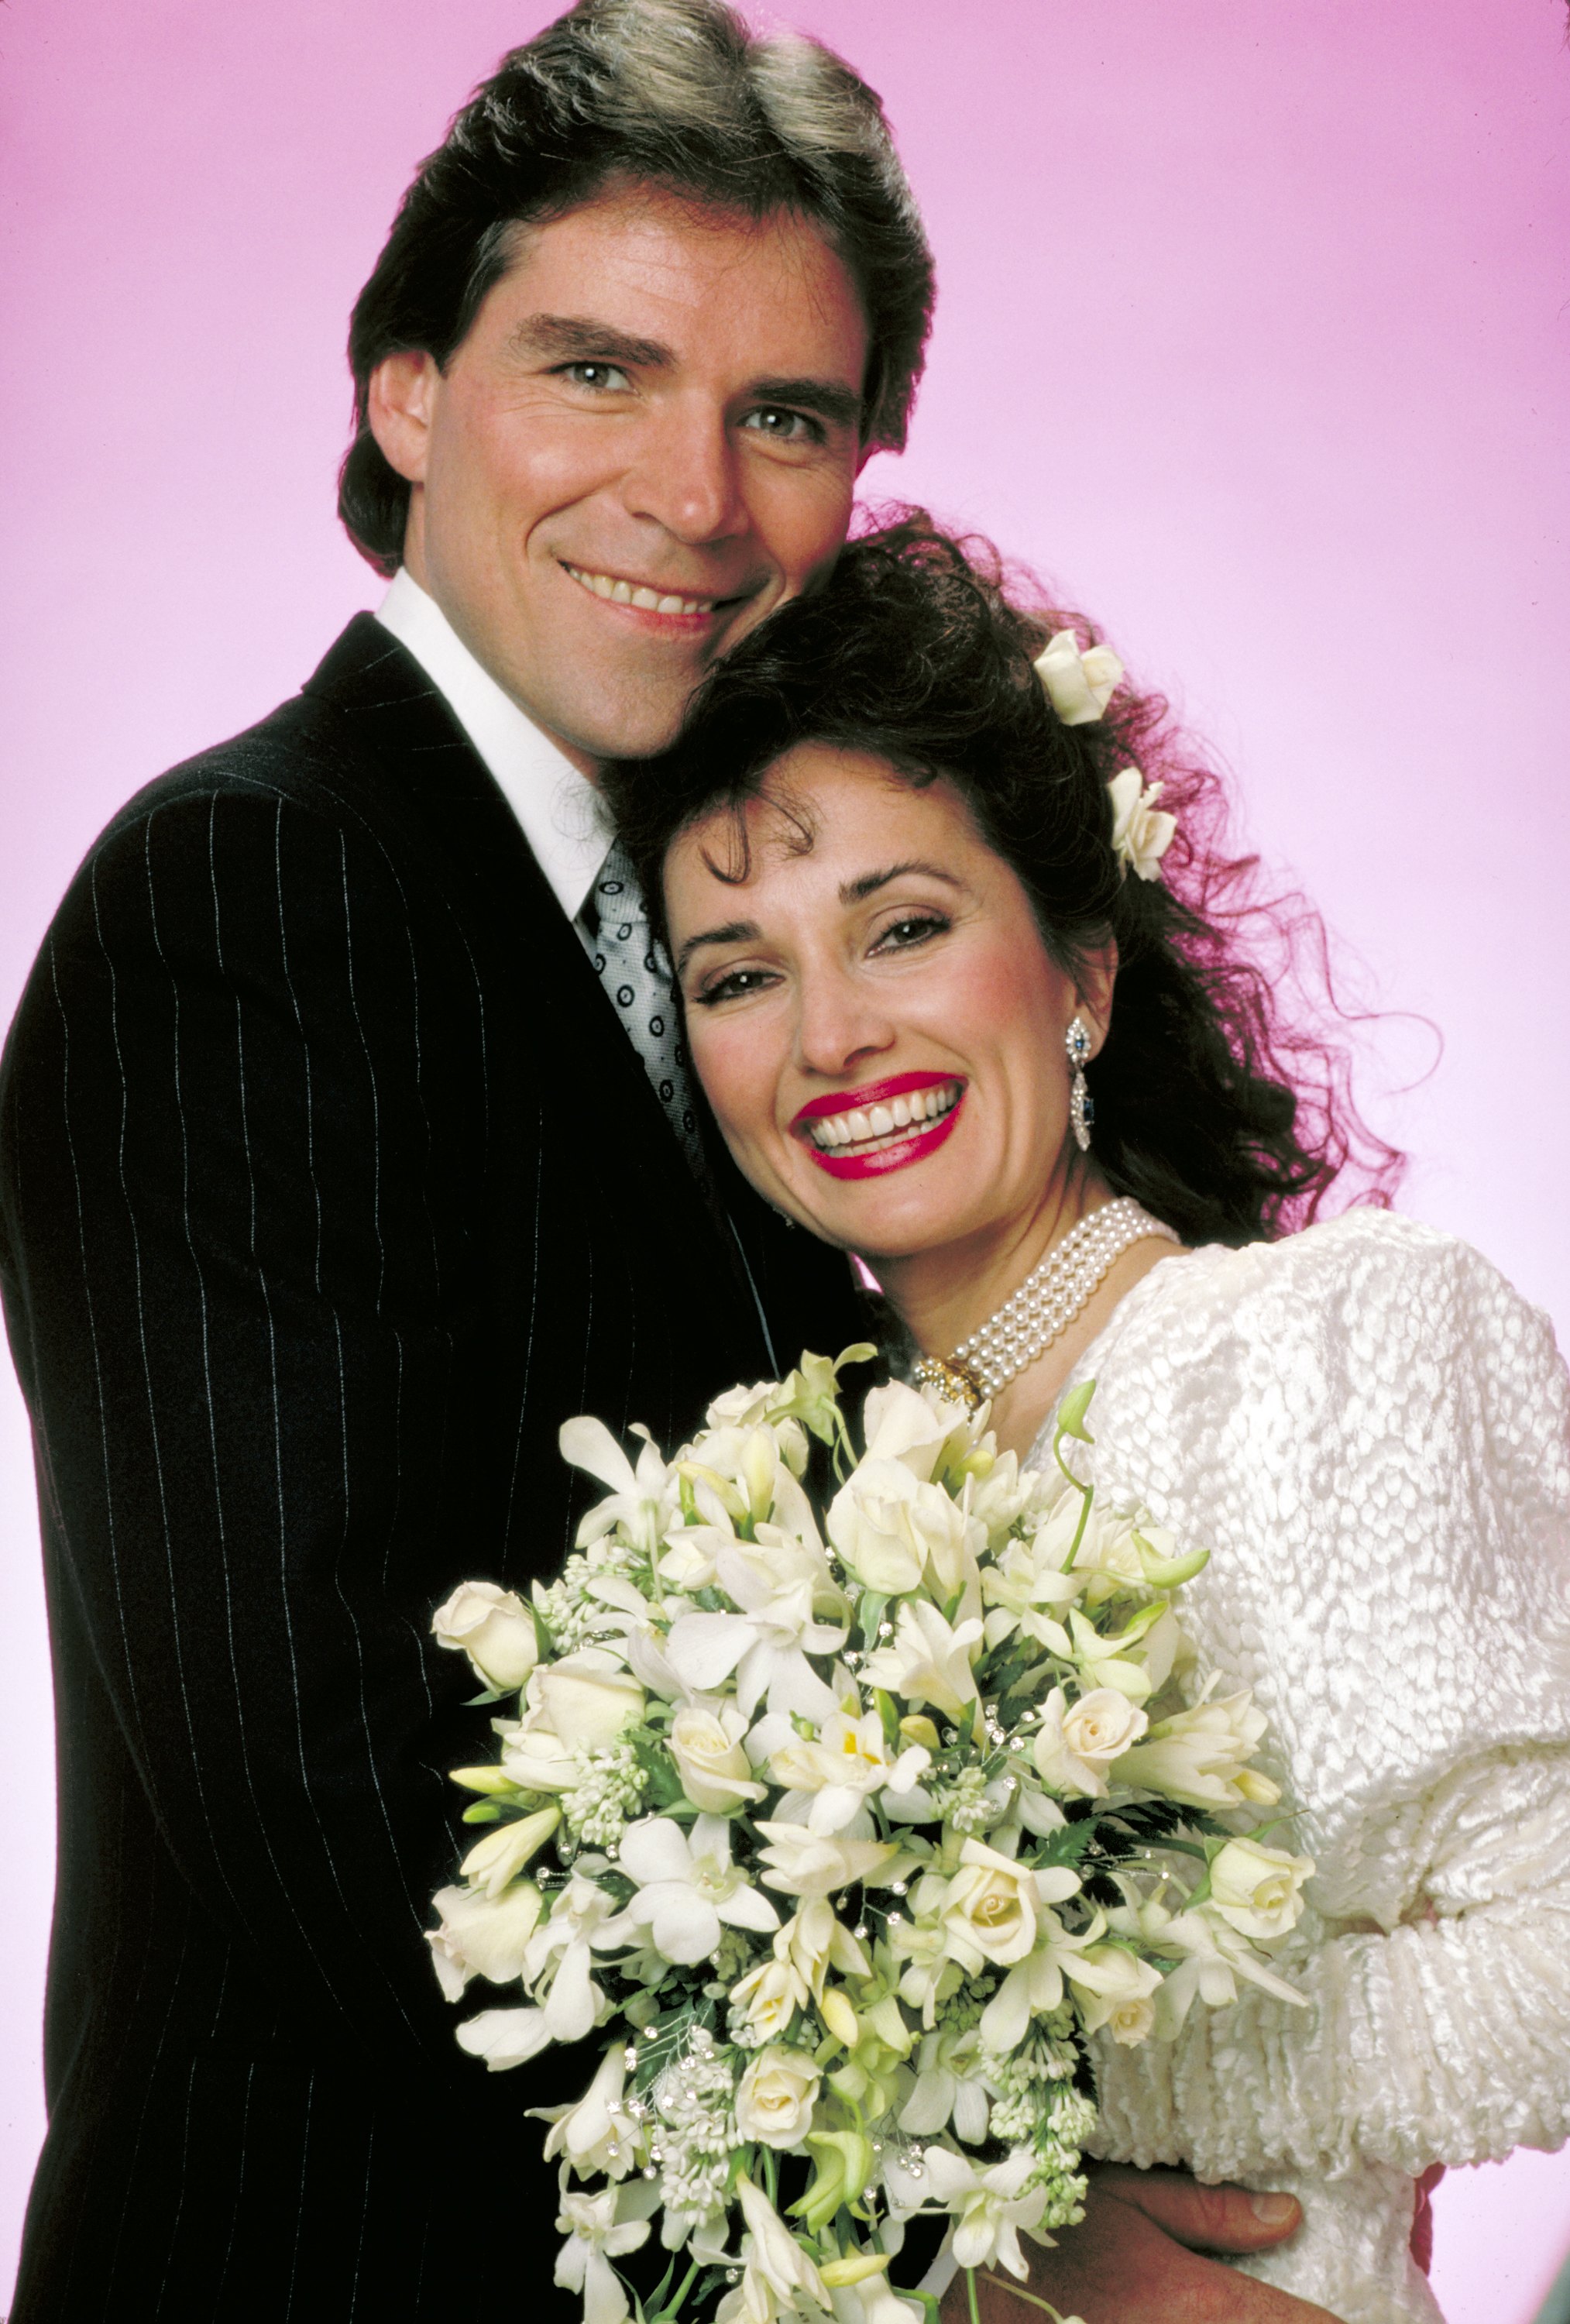 Larkin Malloy and Susan Lucci's wedding on "All My Children." March 2, 1988 | Source: Getty Images